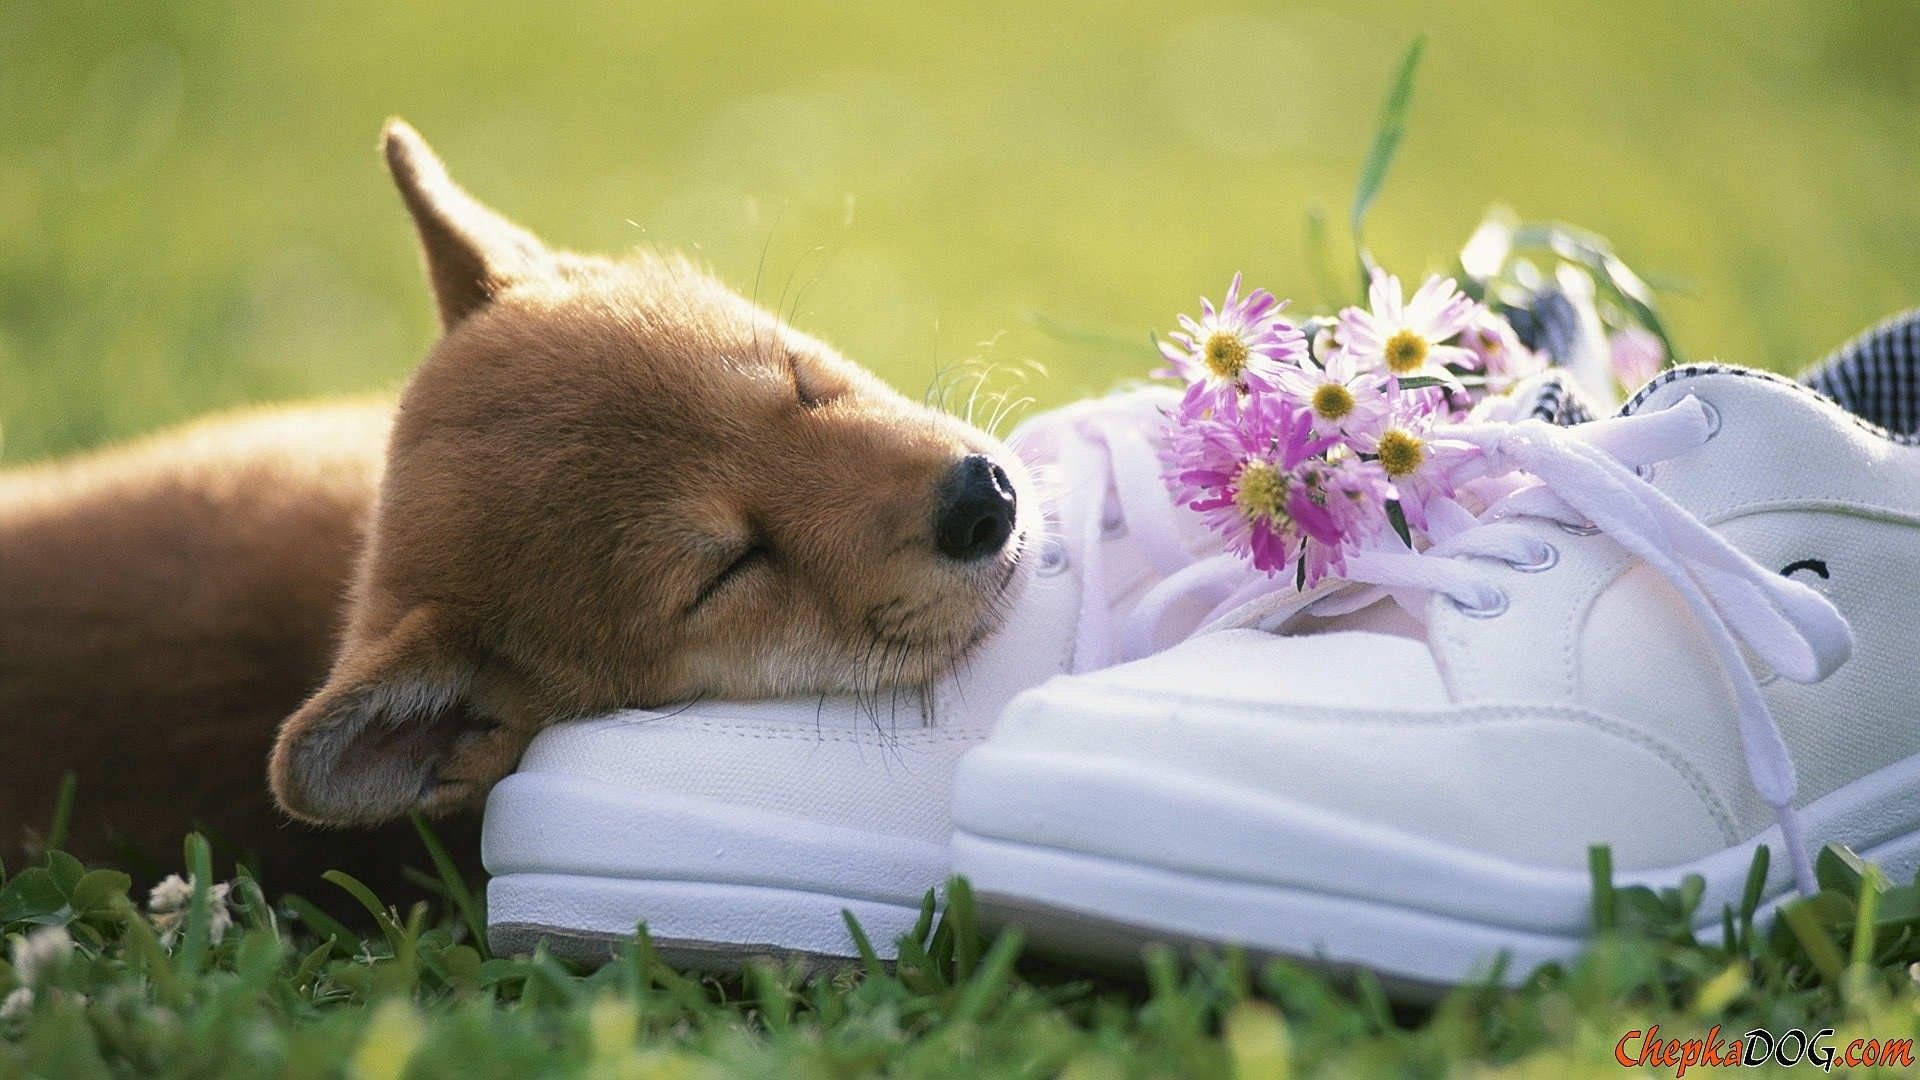 Cute Spring Dog On Shoes Wallpaper